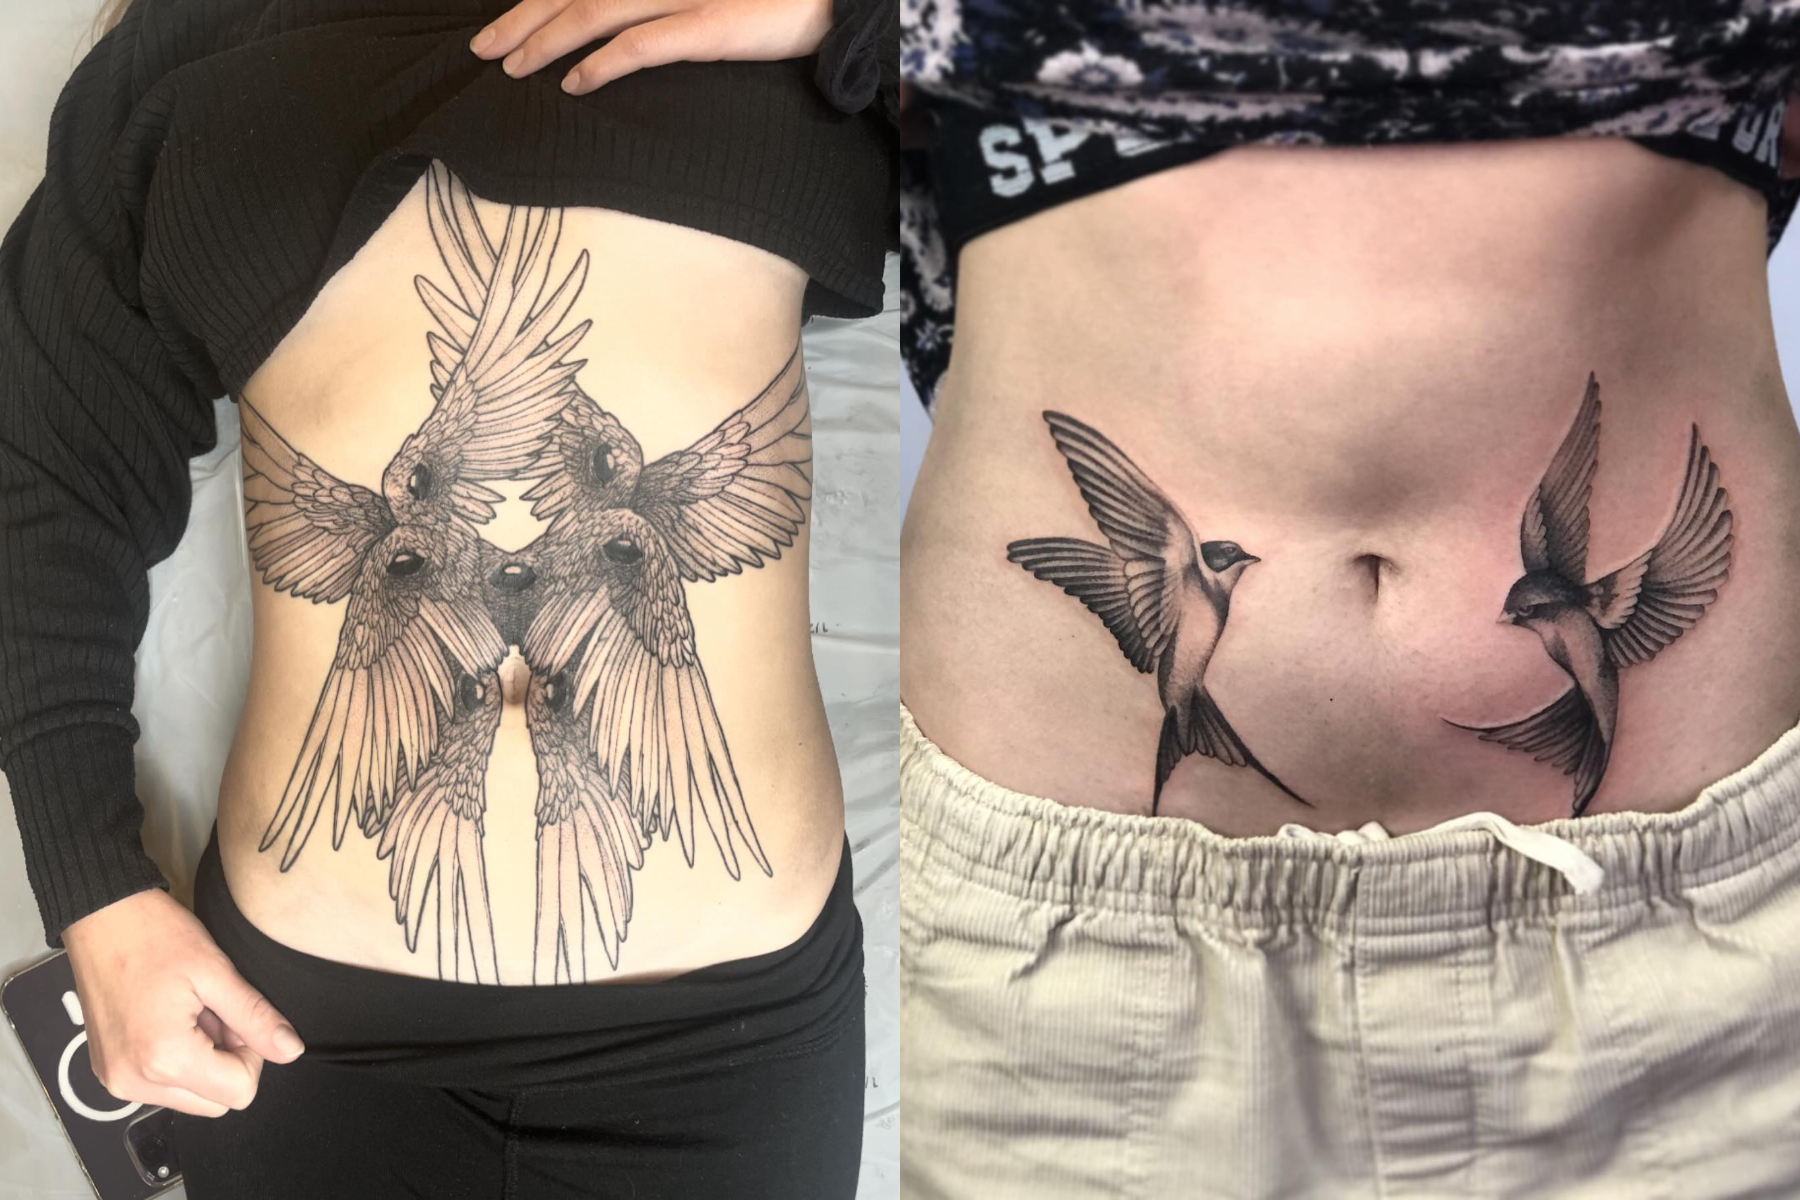 A woman with birds wings tattoo (L) and another one with 2 birds tattoo